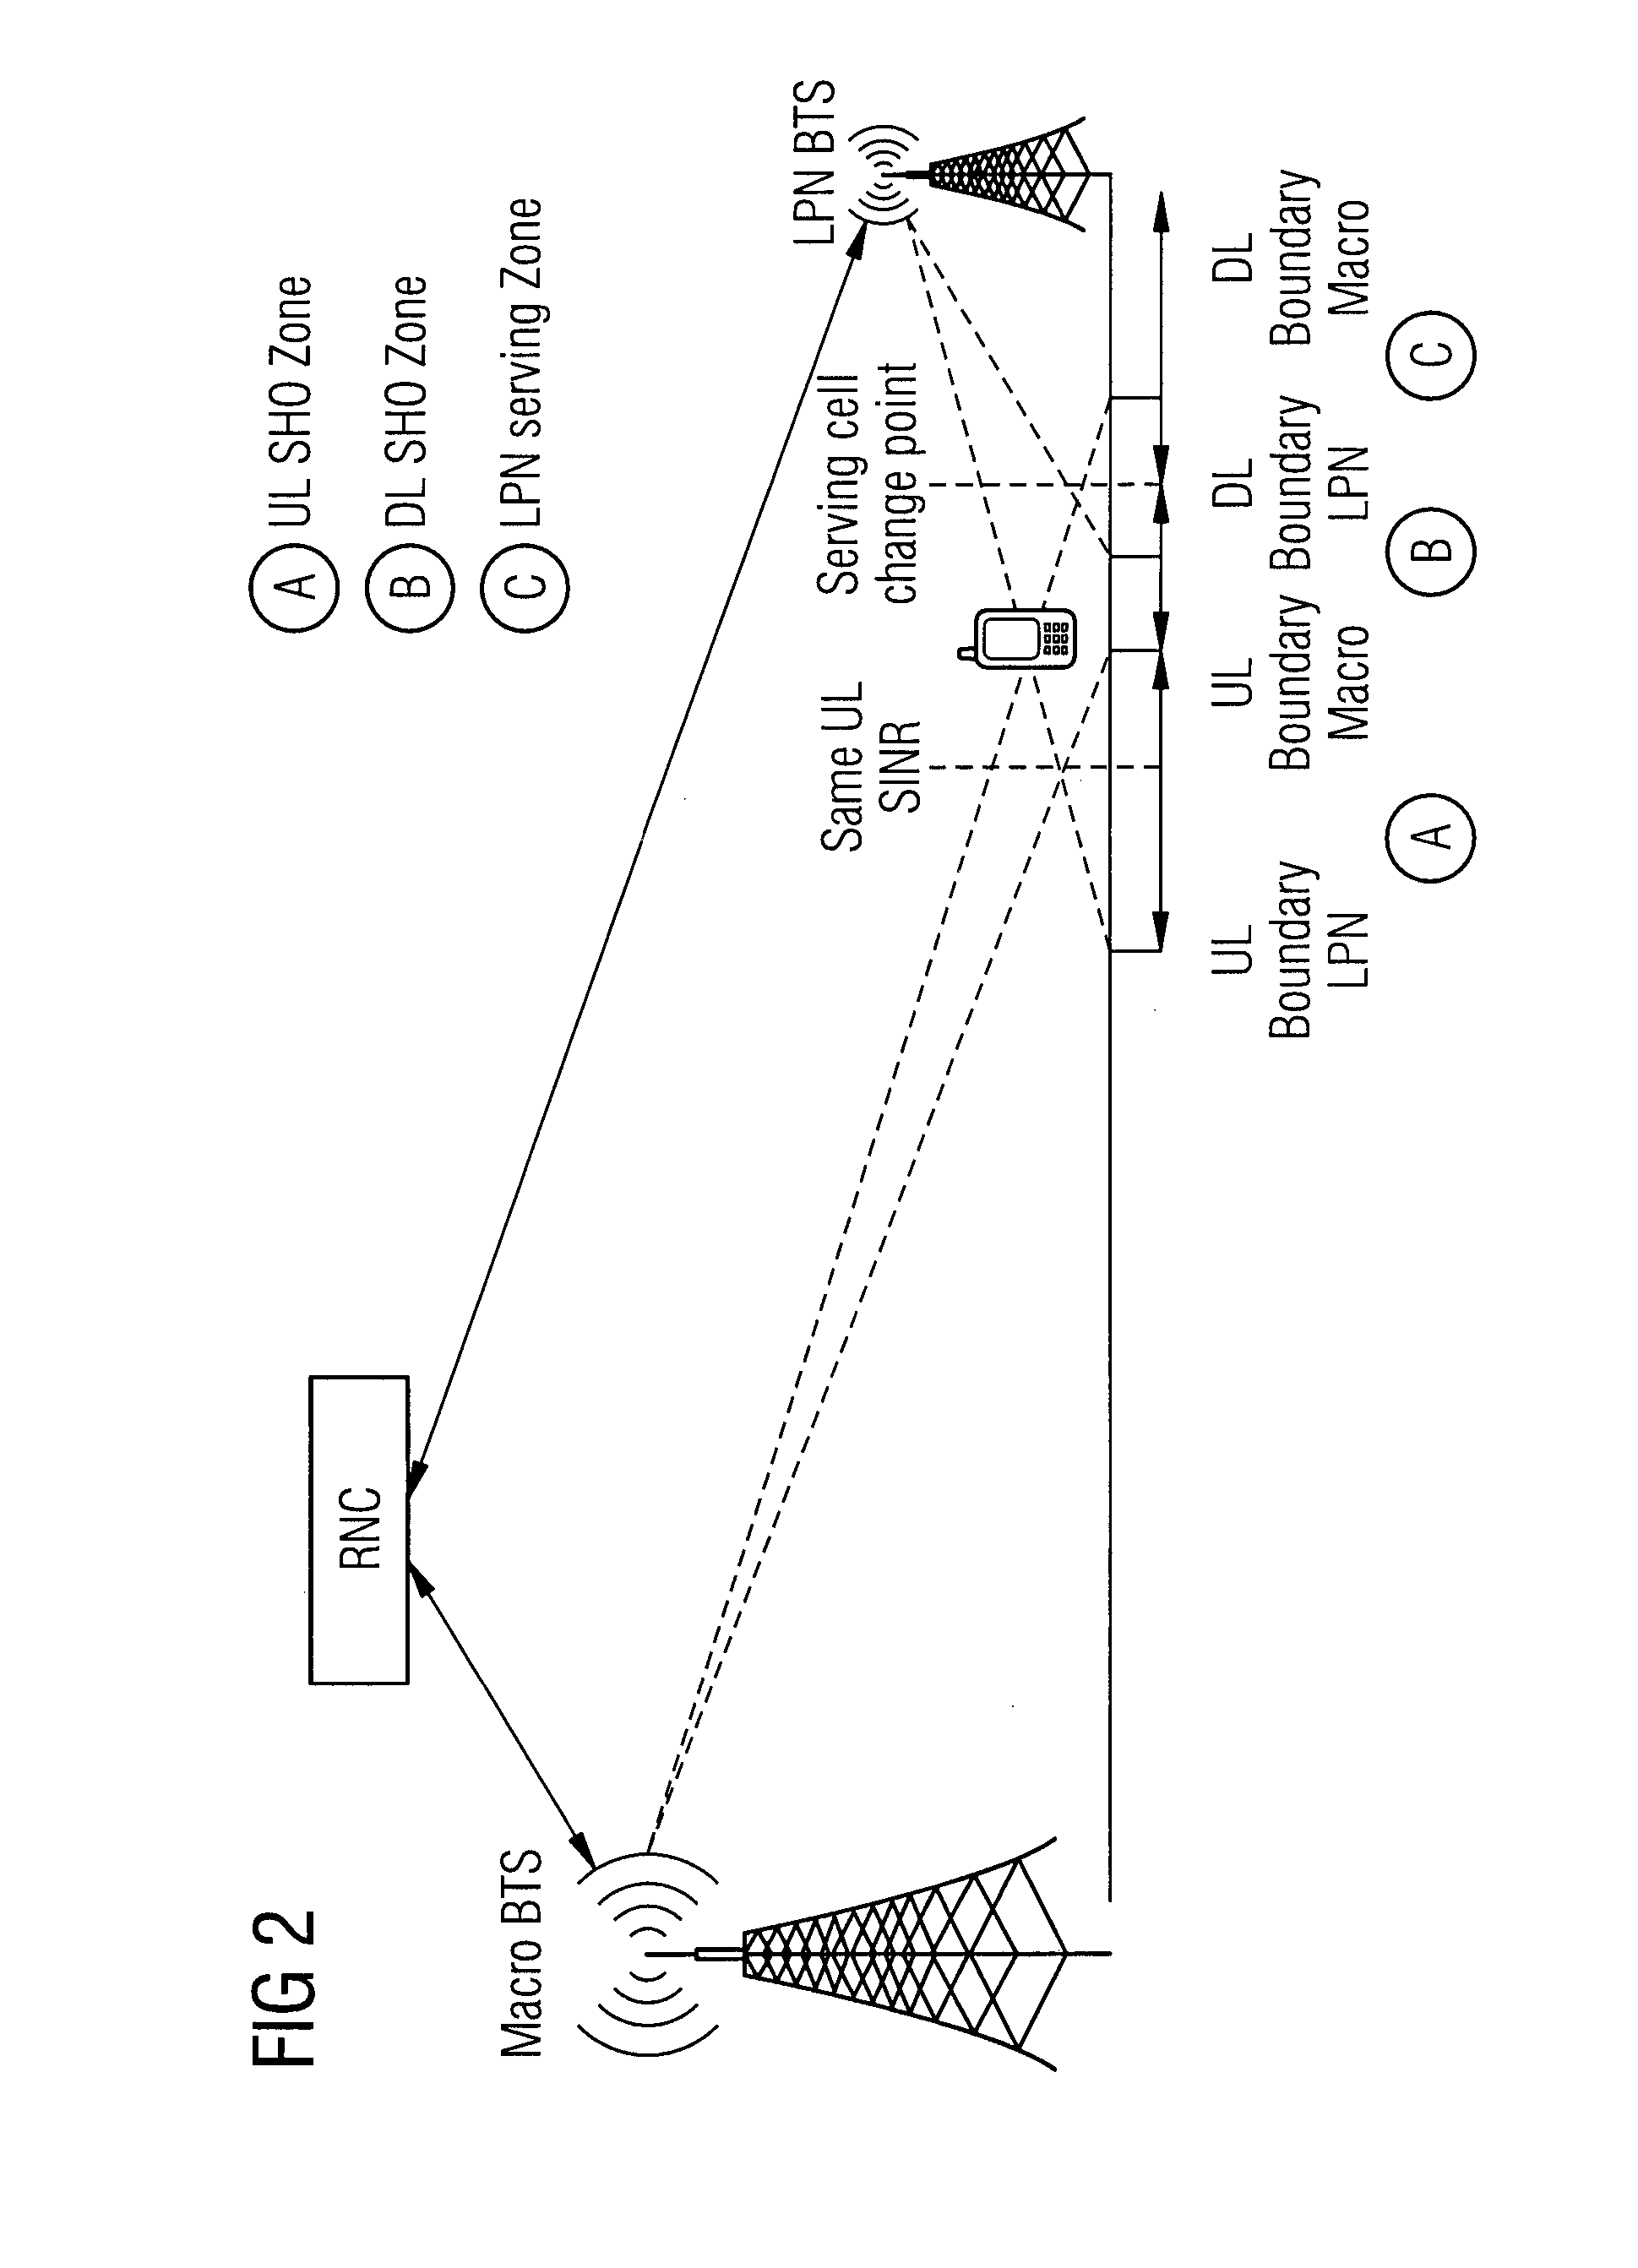 Interference Mitigation in Strong Imbalance Zone